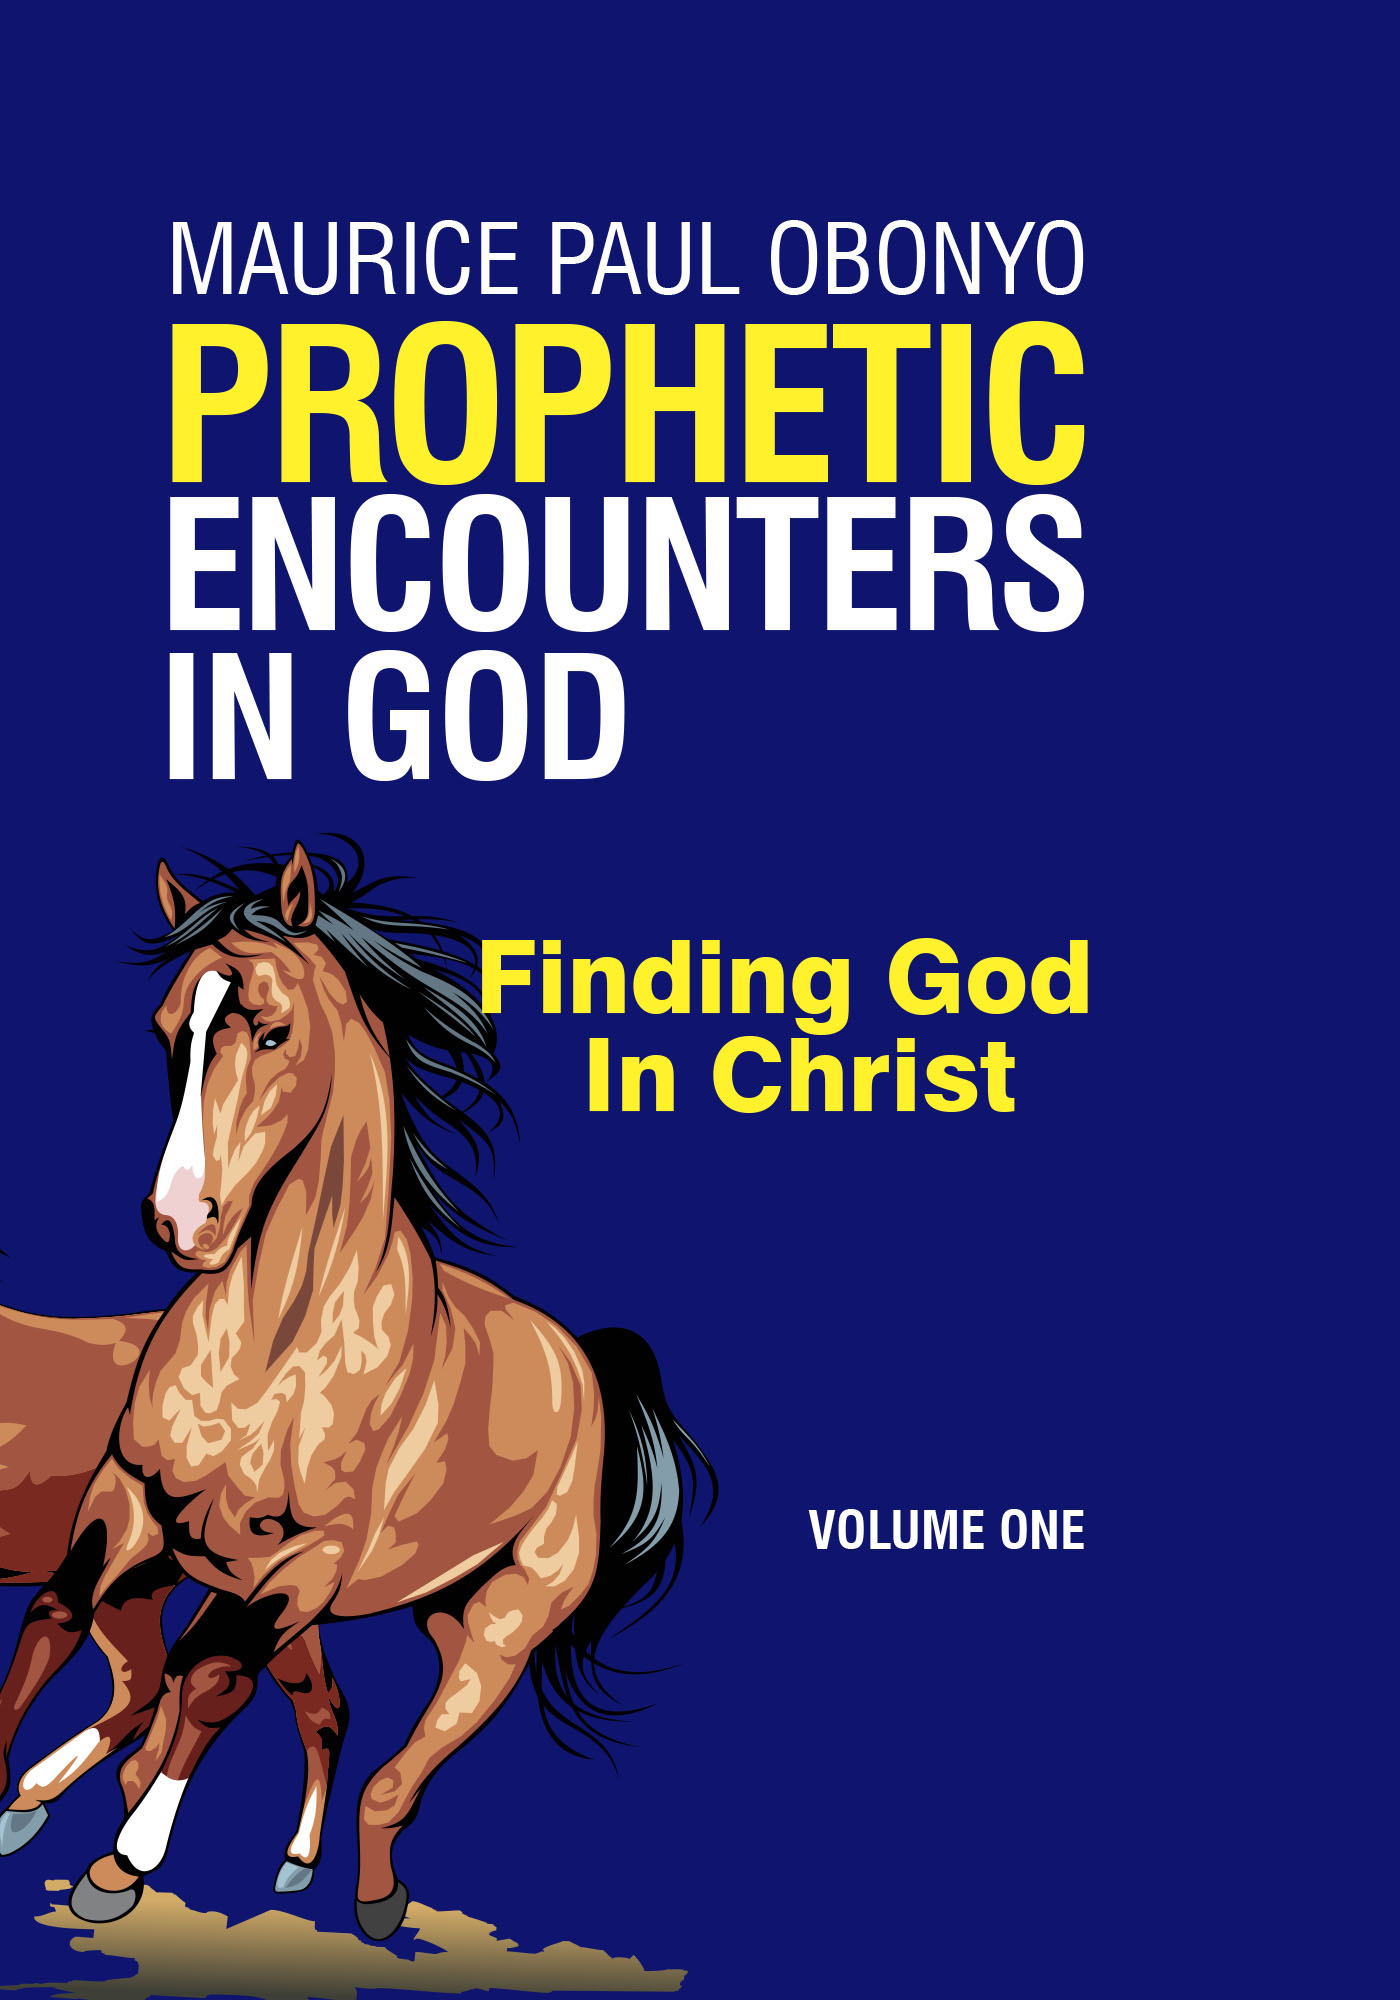 FREE: Prophetic Encounters In God: Finding God In Christ by Maurice Paul Obonyo